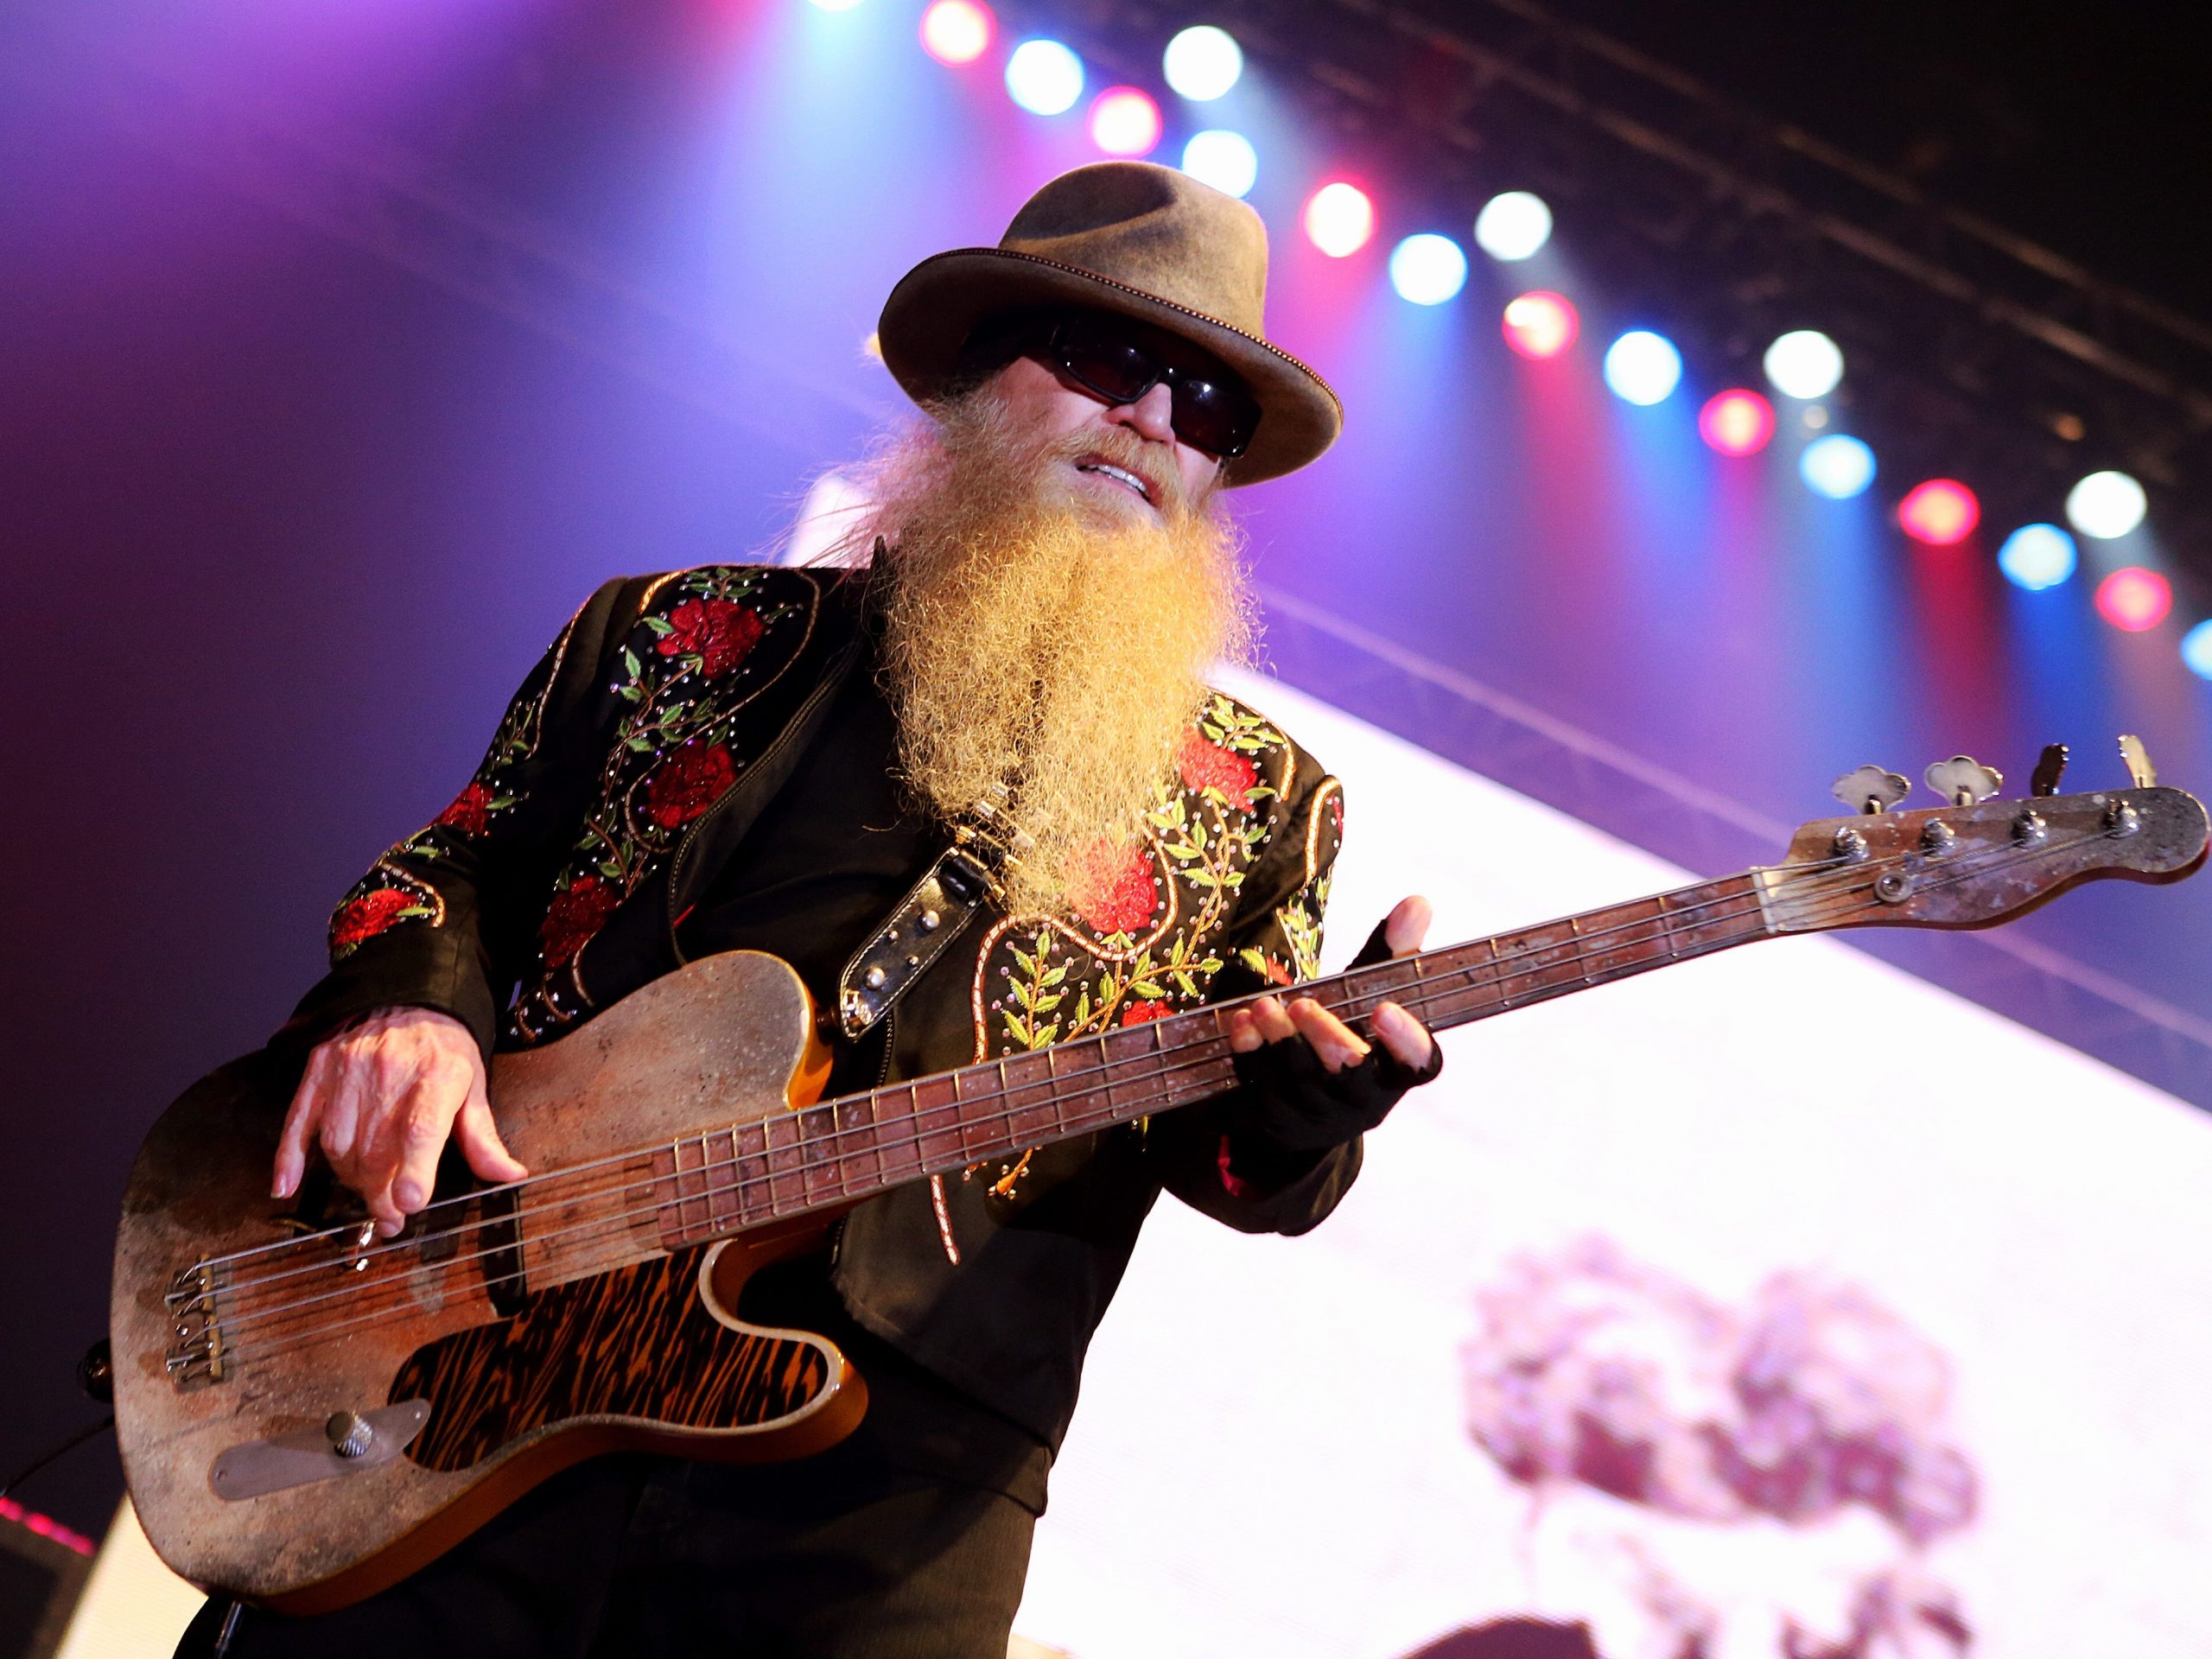 Dusty Hill holding a bass guitar during a performance on stage